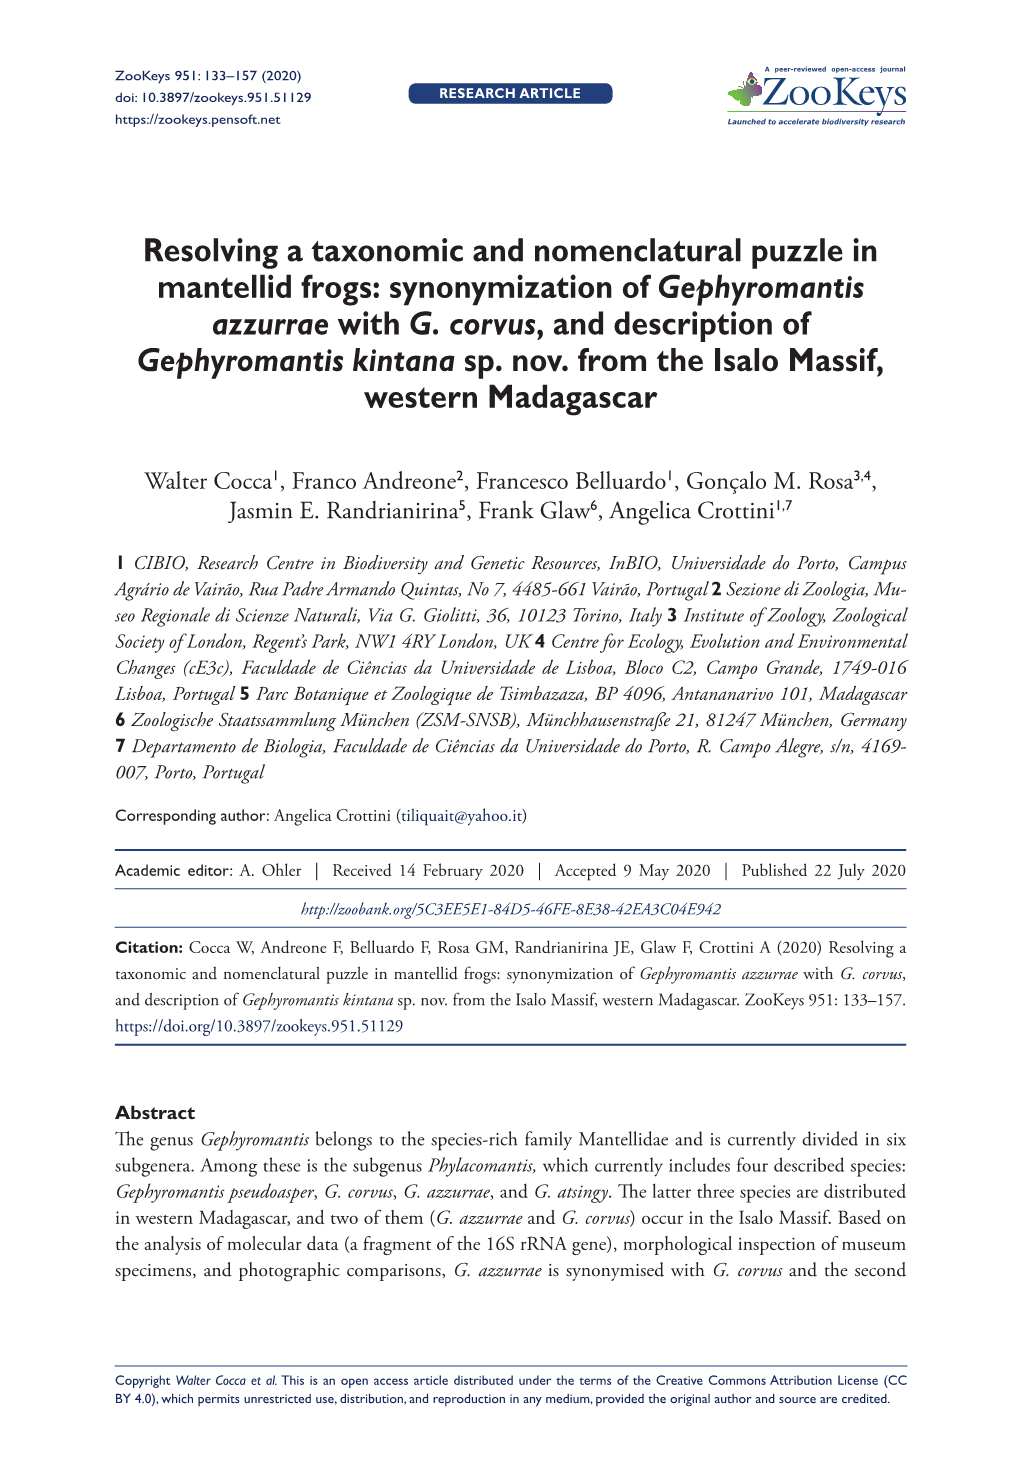 Resolving a Taxonomic and Nomenclatural Puzzle in Mantellid Frogs: Synonymization of Gephyromantis Azzurrae with G